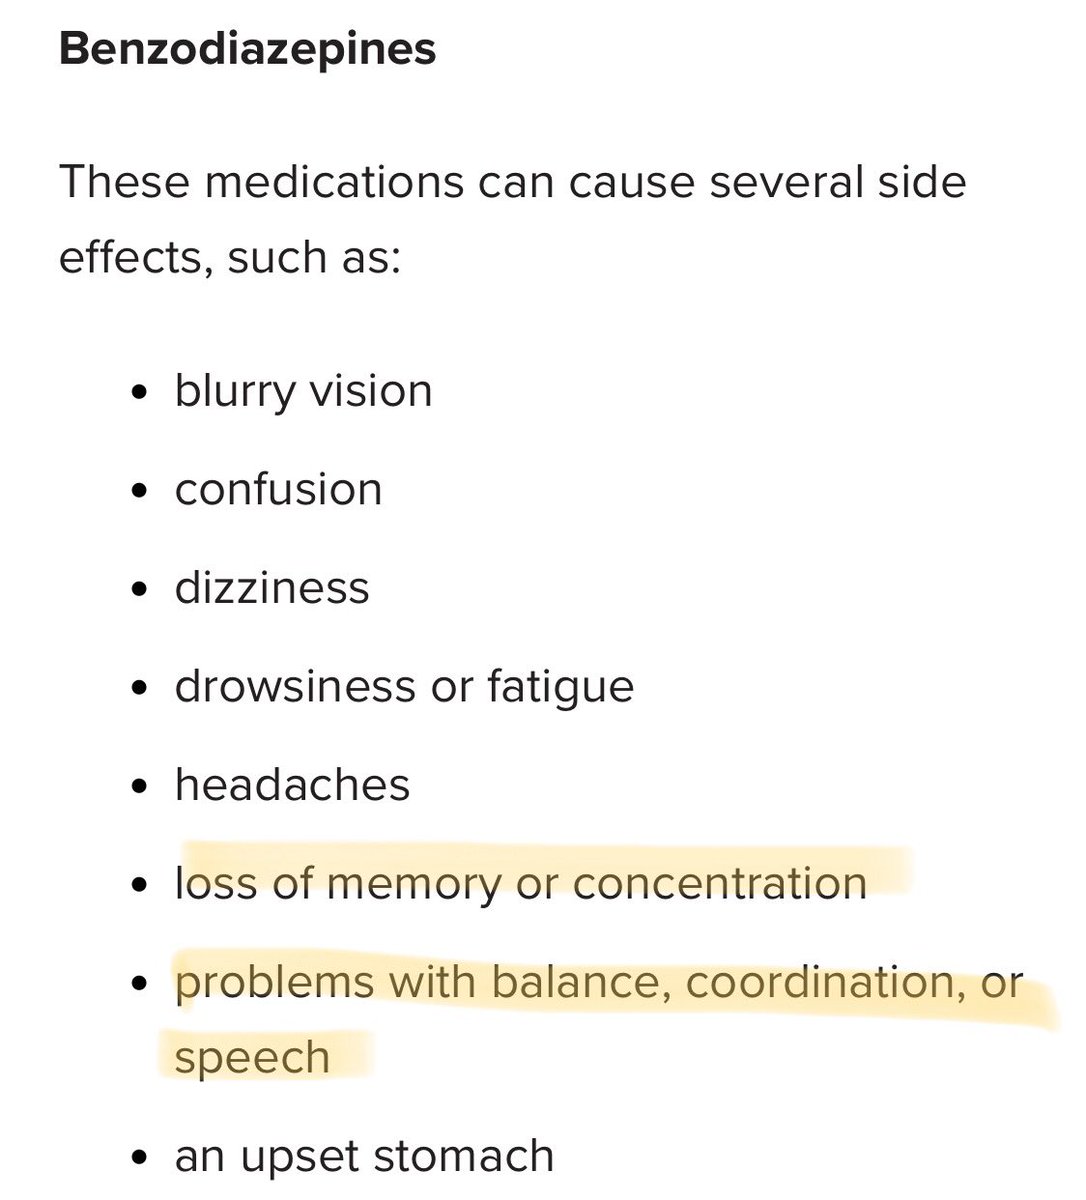 When having mental health issues, meds are commonly prescribed when seeking treatment. Selena has claimed to be on meds and to no surprise, this too comes with side effects. This can help explain any balance coordination issues, speech issues, and memory problems.